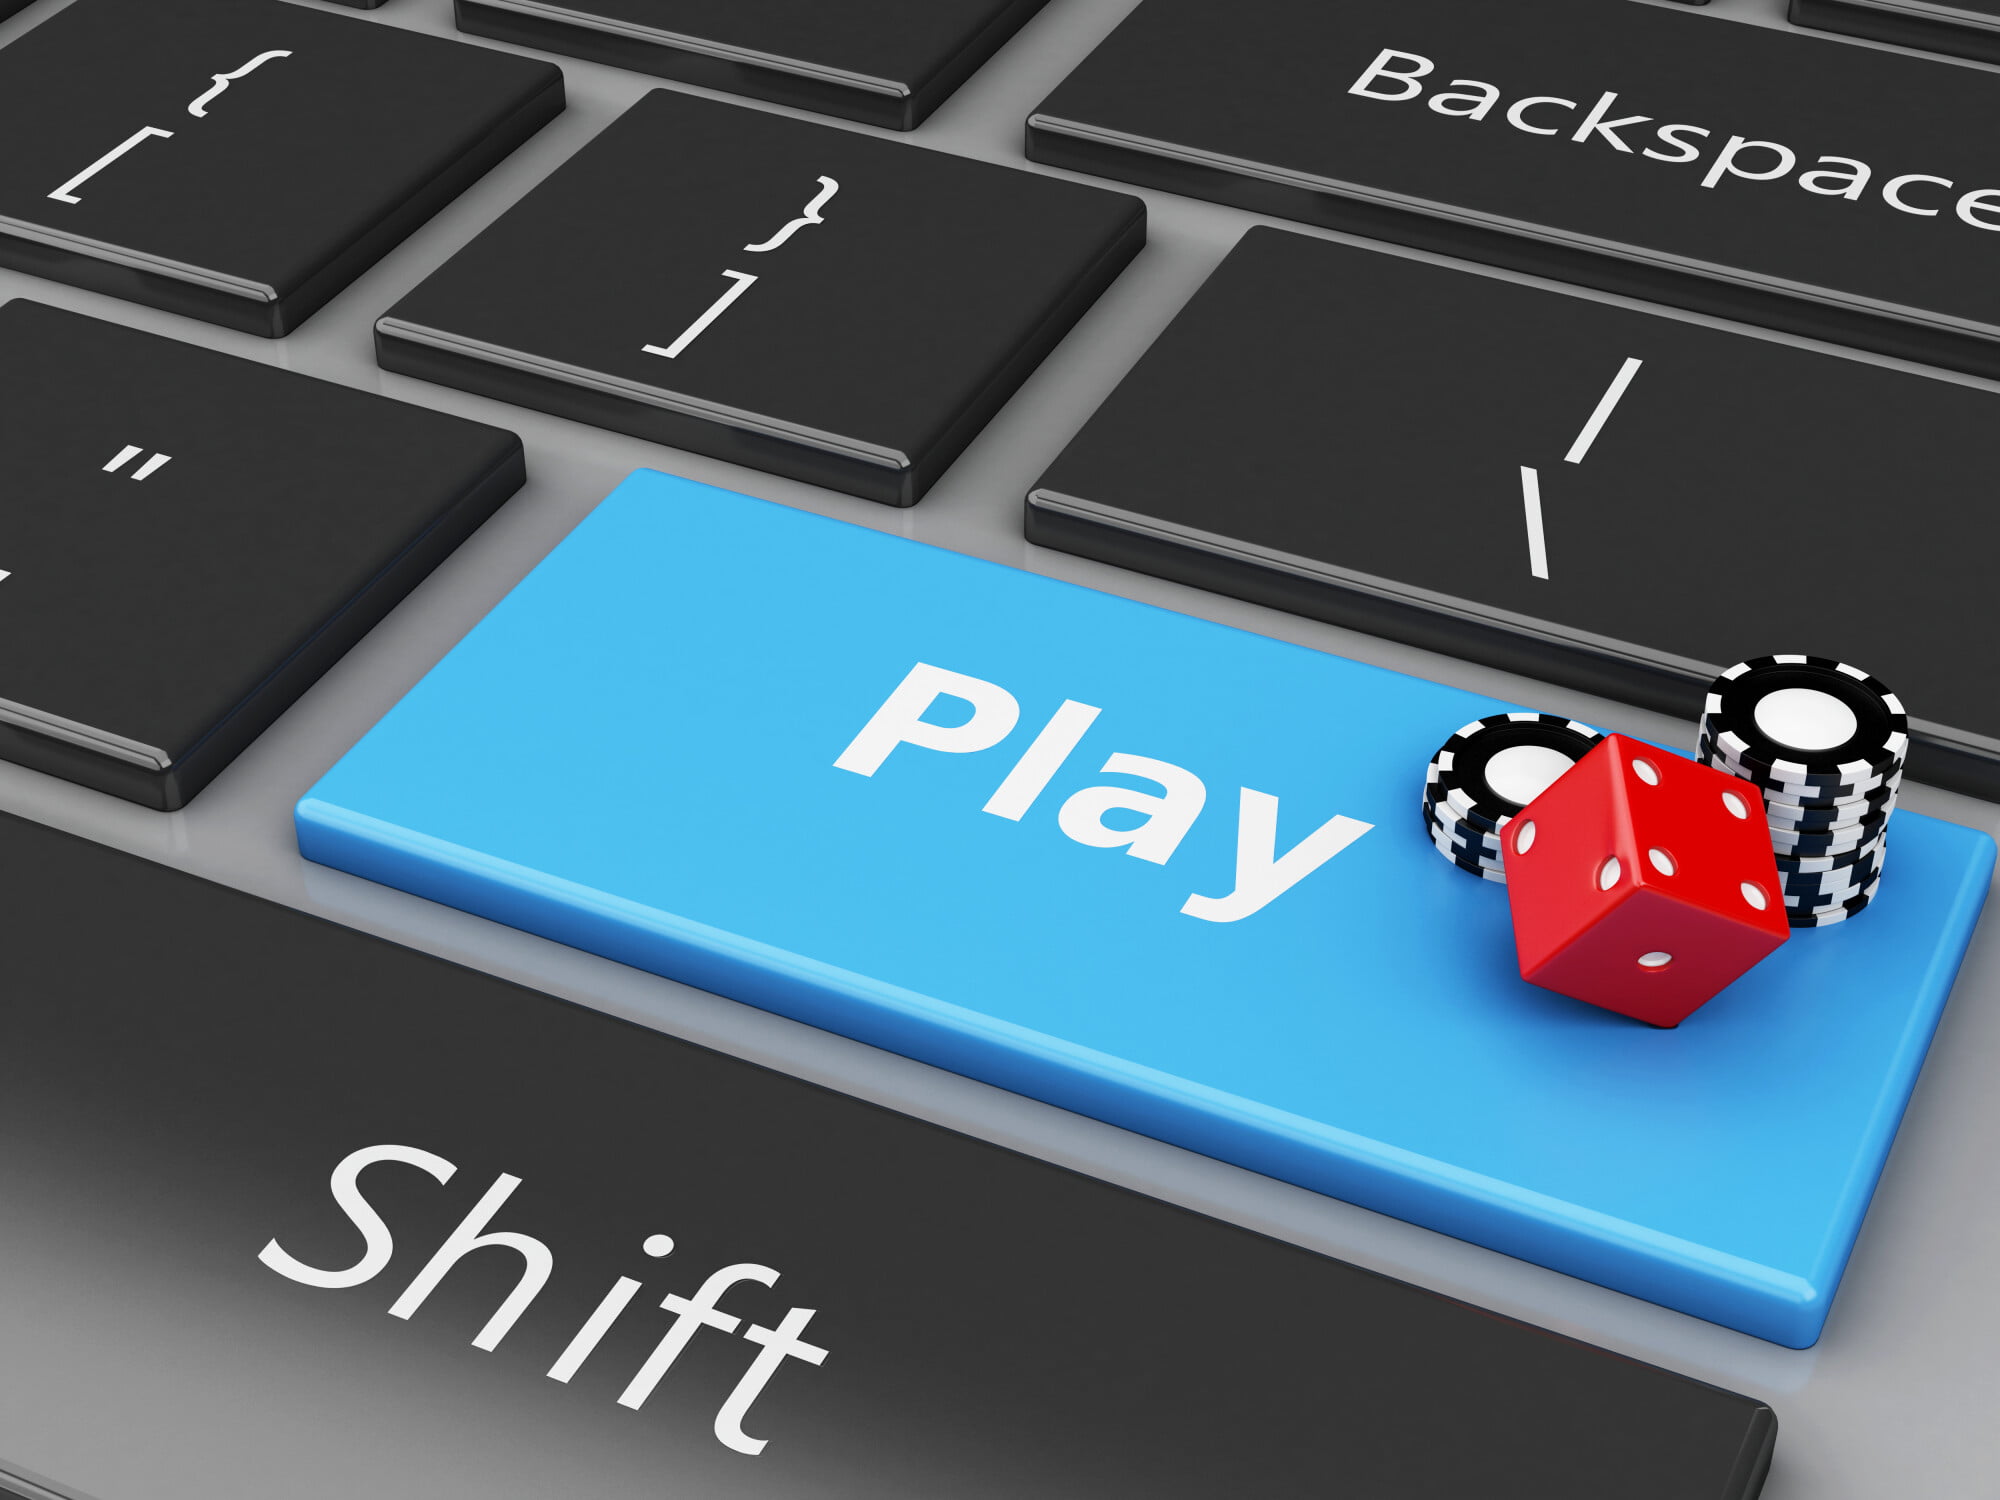 Are you thinking about trying your hand at online gambling? Let us help you out with these 6 online gambling tips and tricks you need to know.